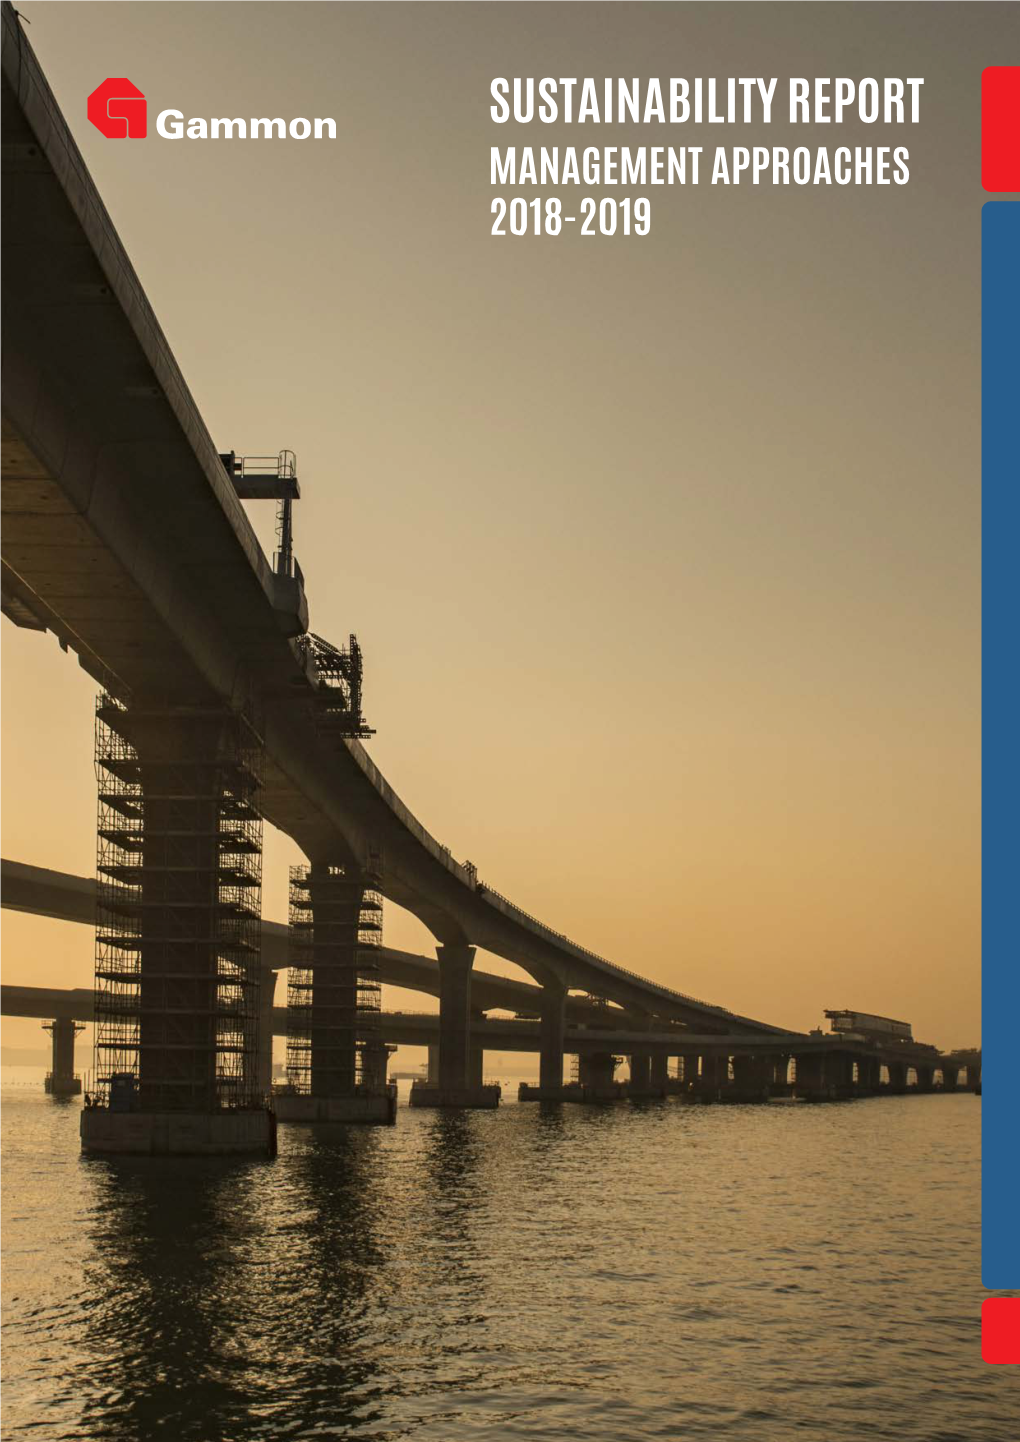 SUSTAINABILITY REPORT MANAGEMENT APPROACHES 2018-2019 Ii SUSTAINABILITY REPORT MANAGEMENT APPROACHES 2018-2019